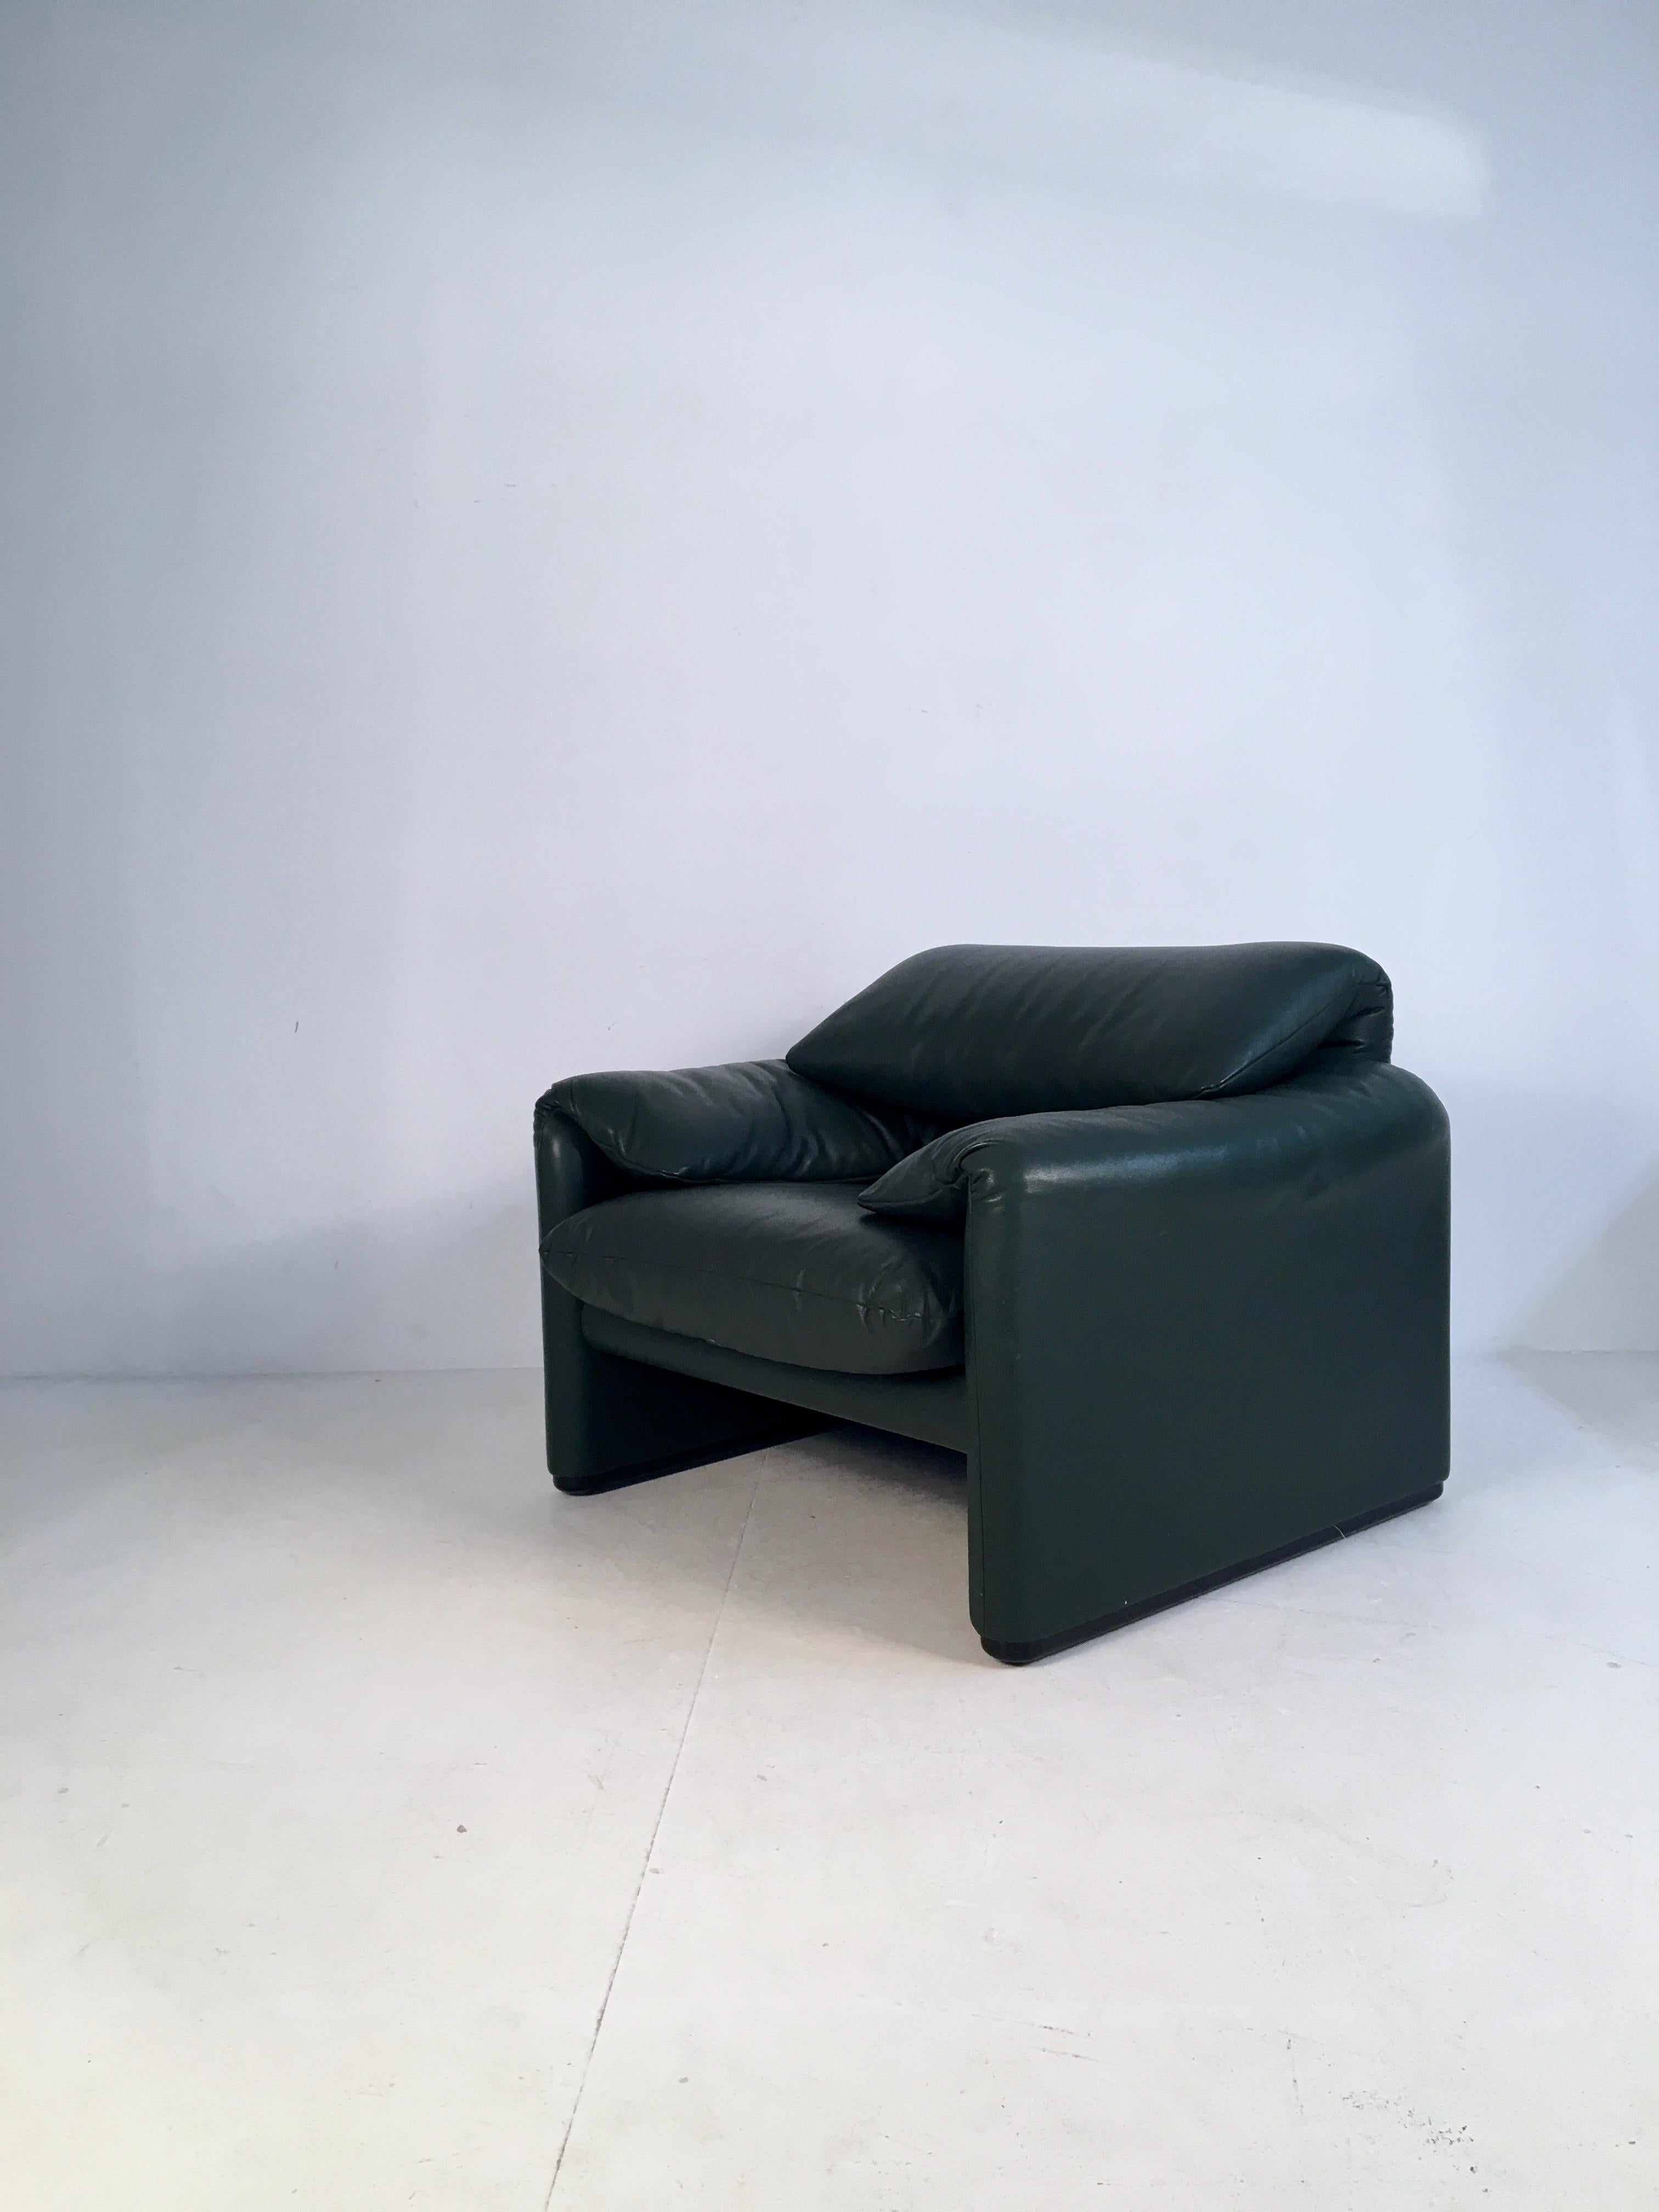 Pair of Green Leather 'Maralunga' Lounge Chairs by Magistretti for Cassina 2